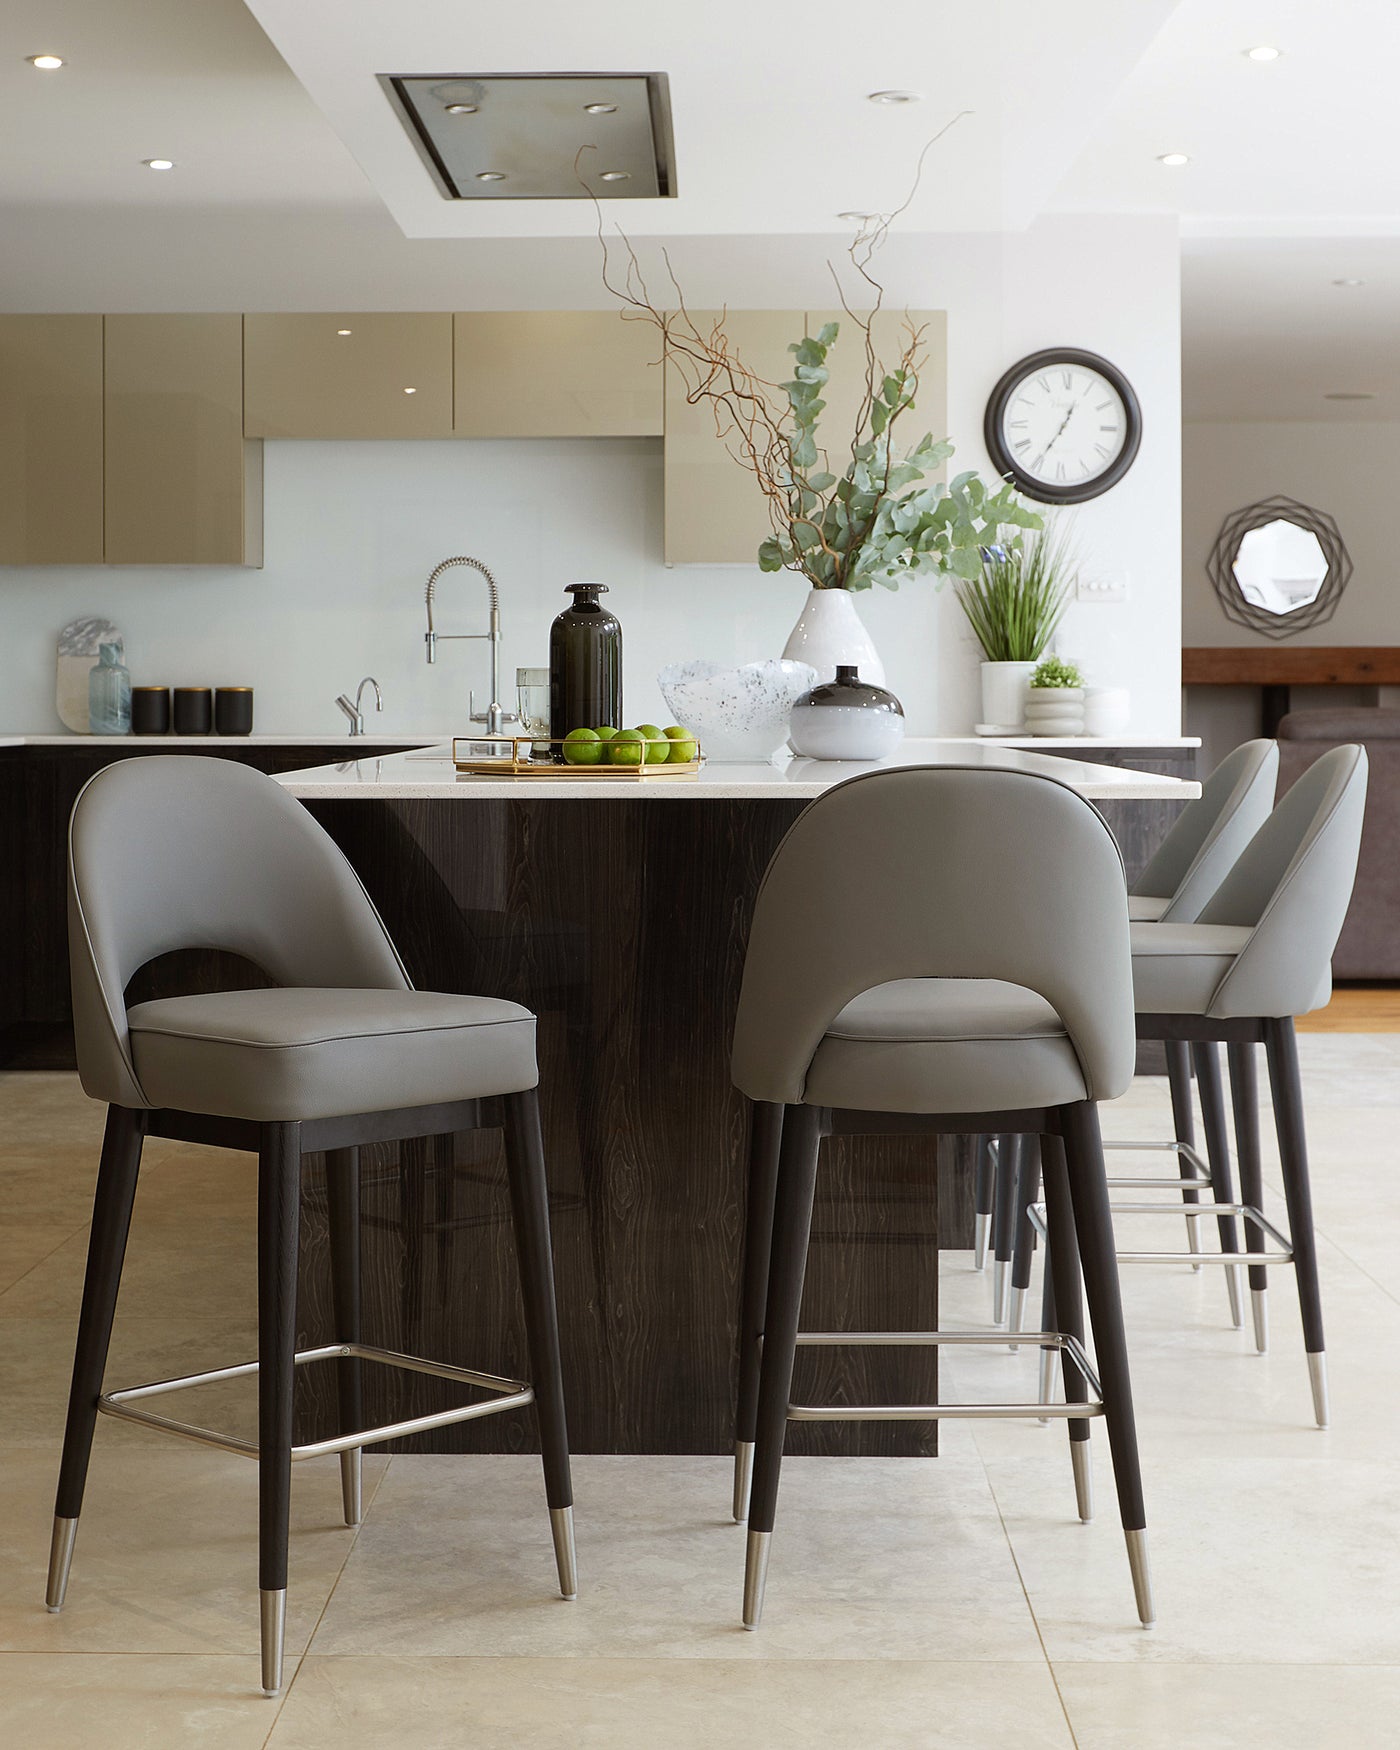 Modern kitchen interior with three elegant grey upholstered bar stools featuring slender black legs with metallic footrests, positioned at a dark wood kitchen island with a white countertop.